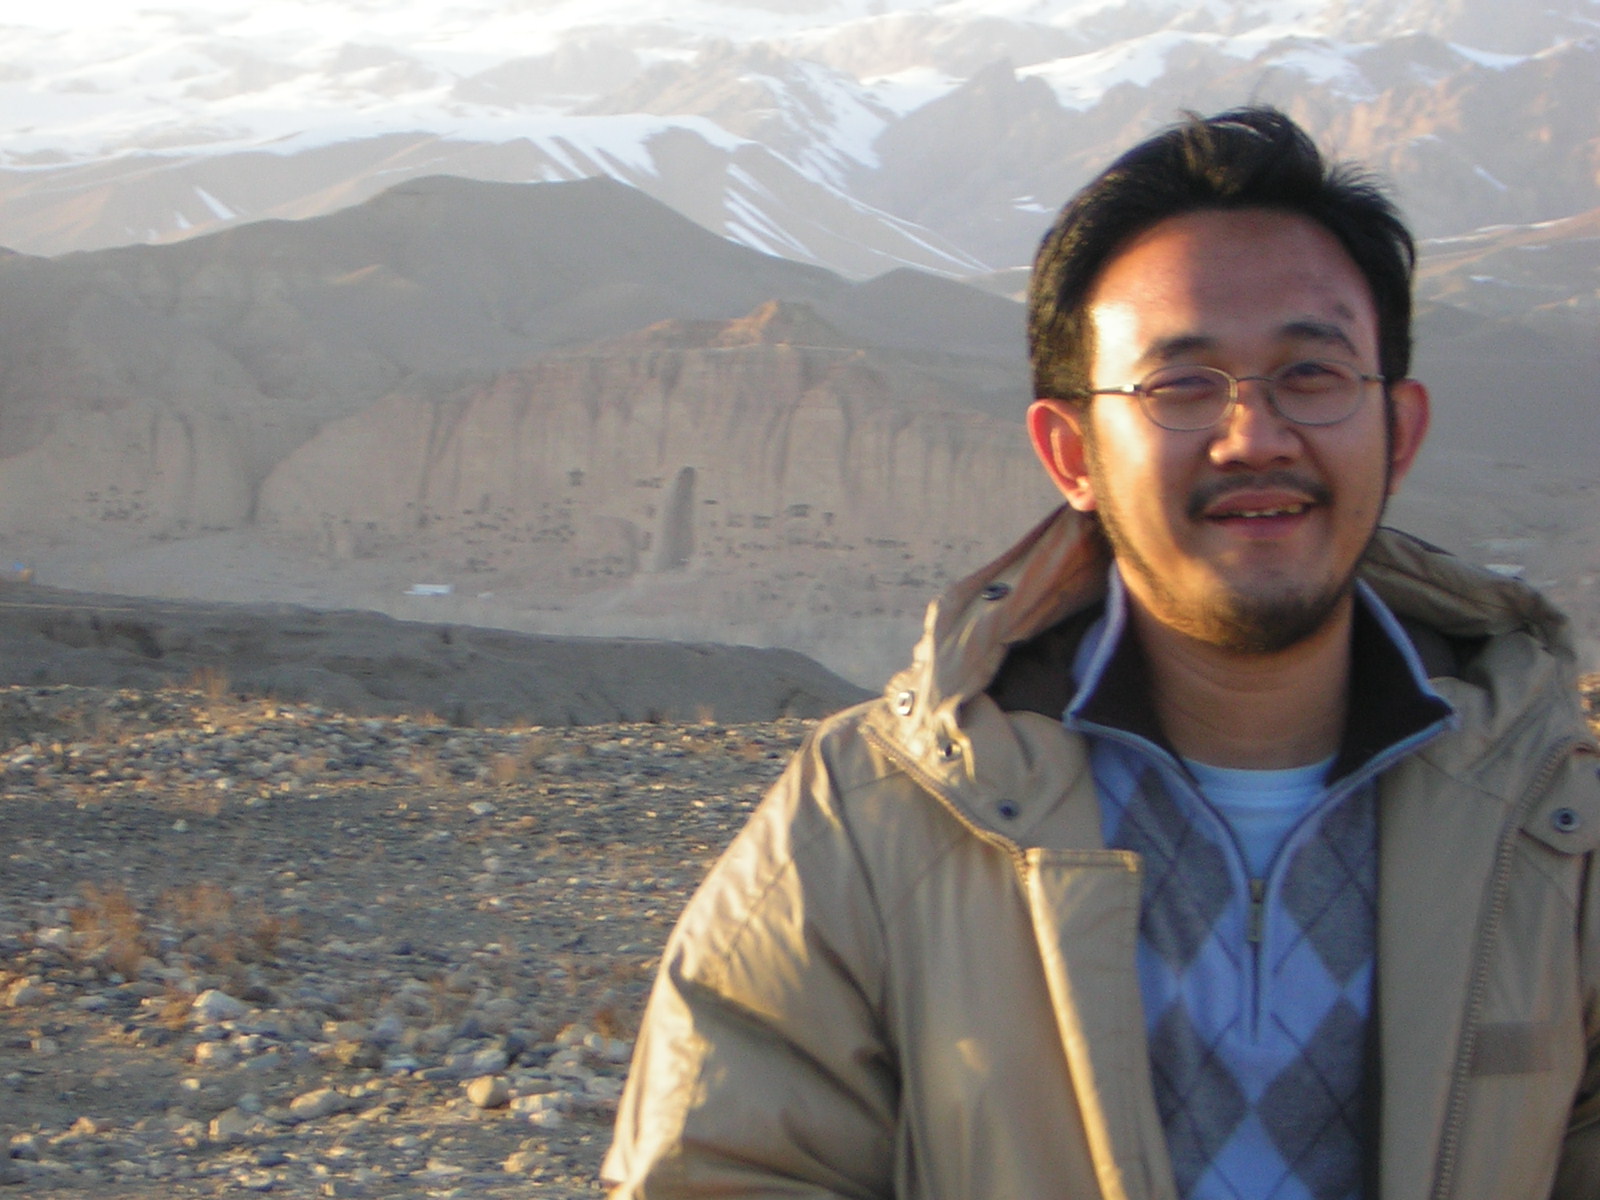 Griffith University alumnus Cipta Setiawan during a visit to the Giant Buddhas of Bamiyan site in Afghanistan